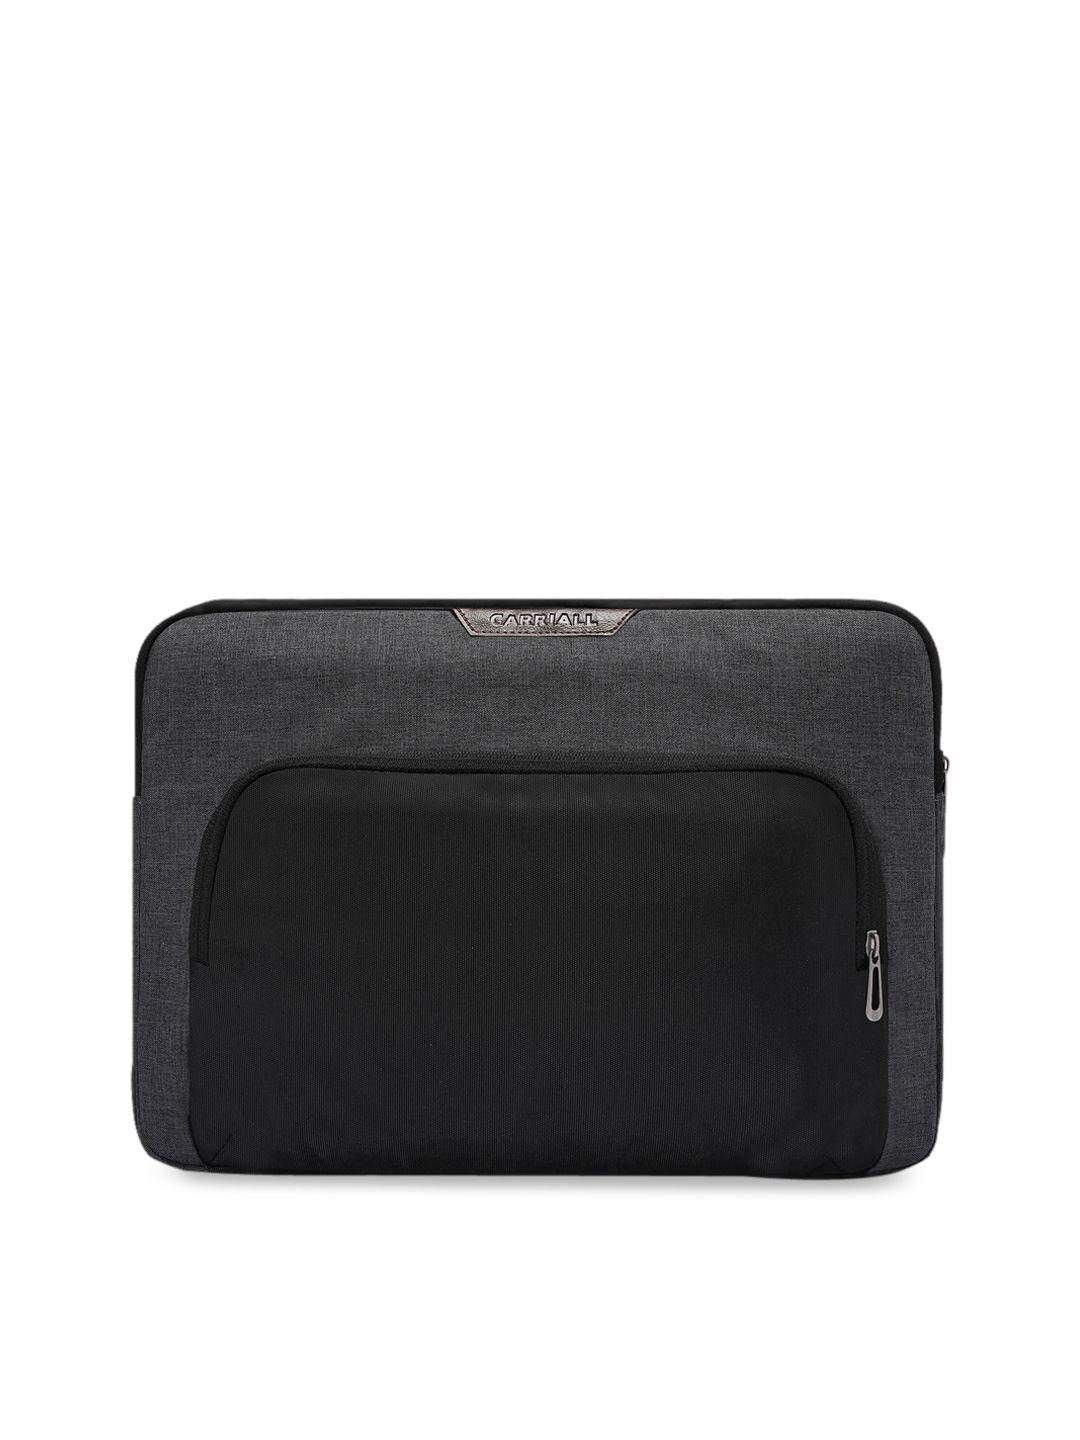 carriall unisex charcoal grey & black solid 15 inch laptop sleeve